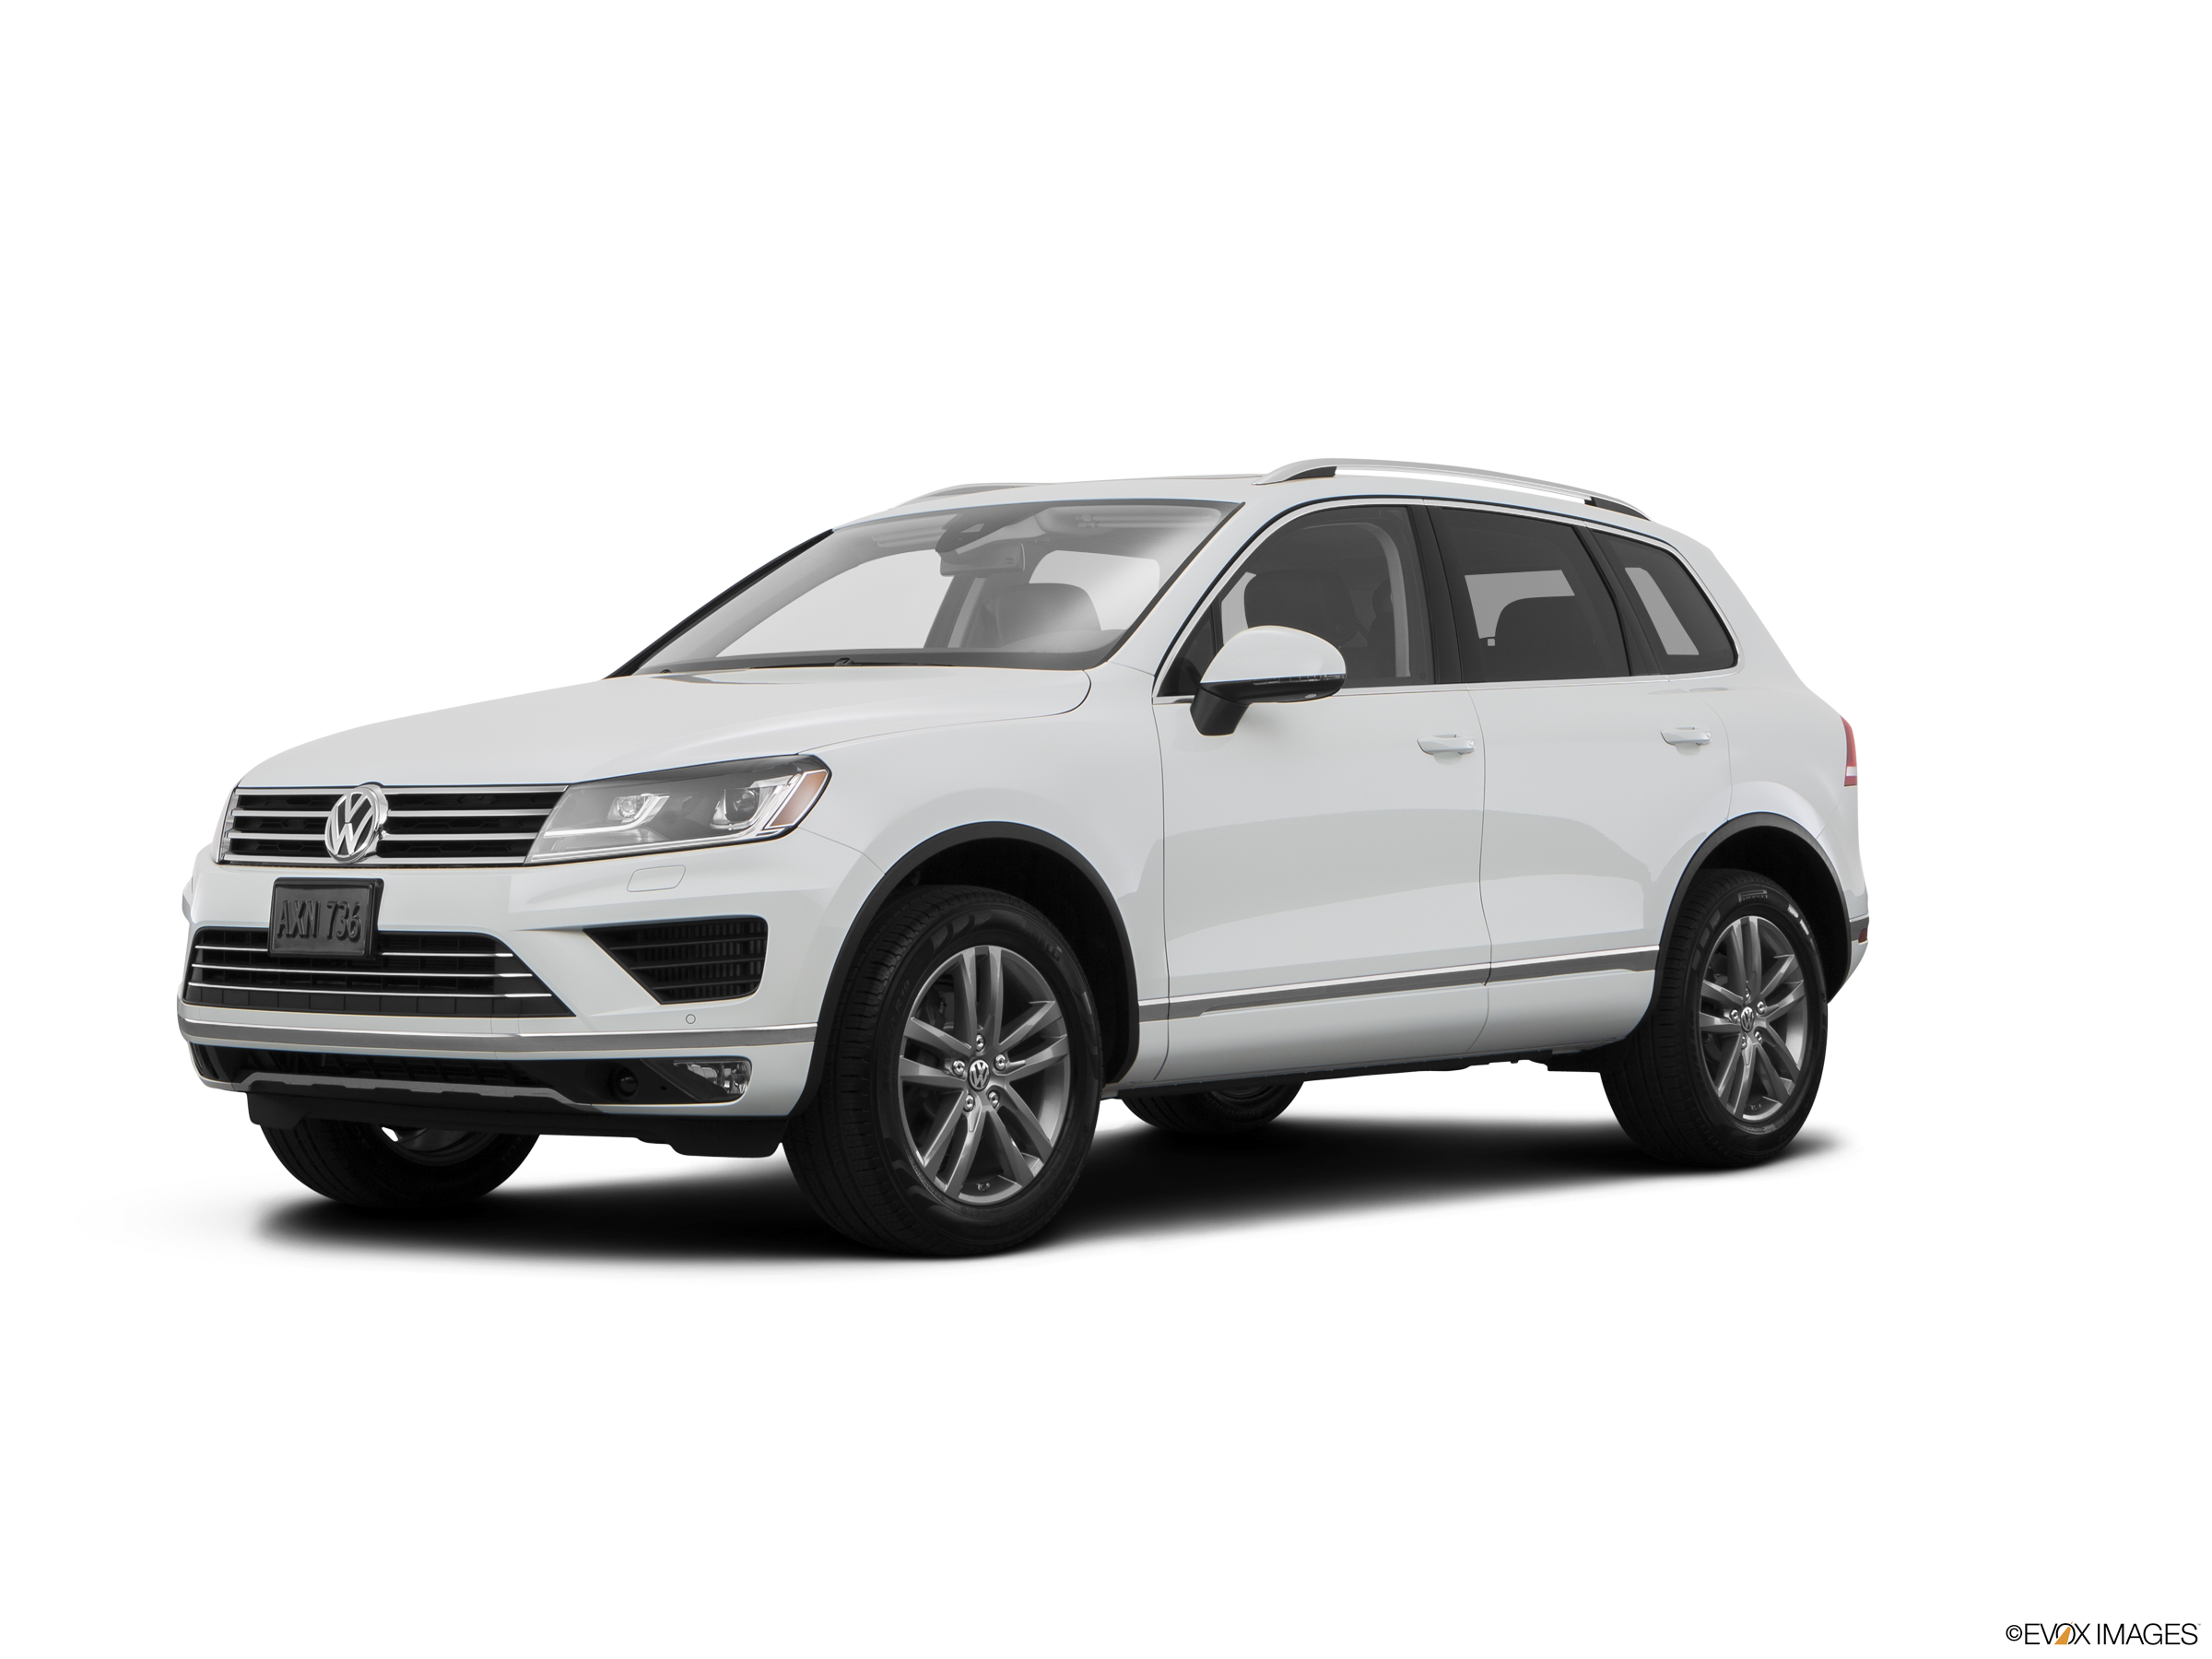 2016 Volkswagen Touareg Price, Value, Ratings & Reviews